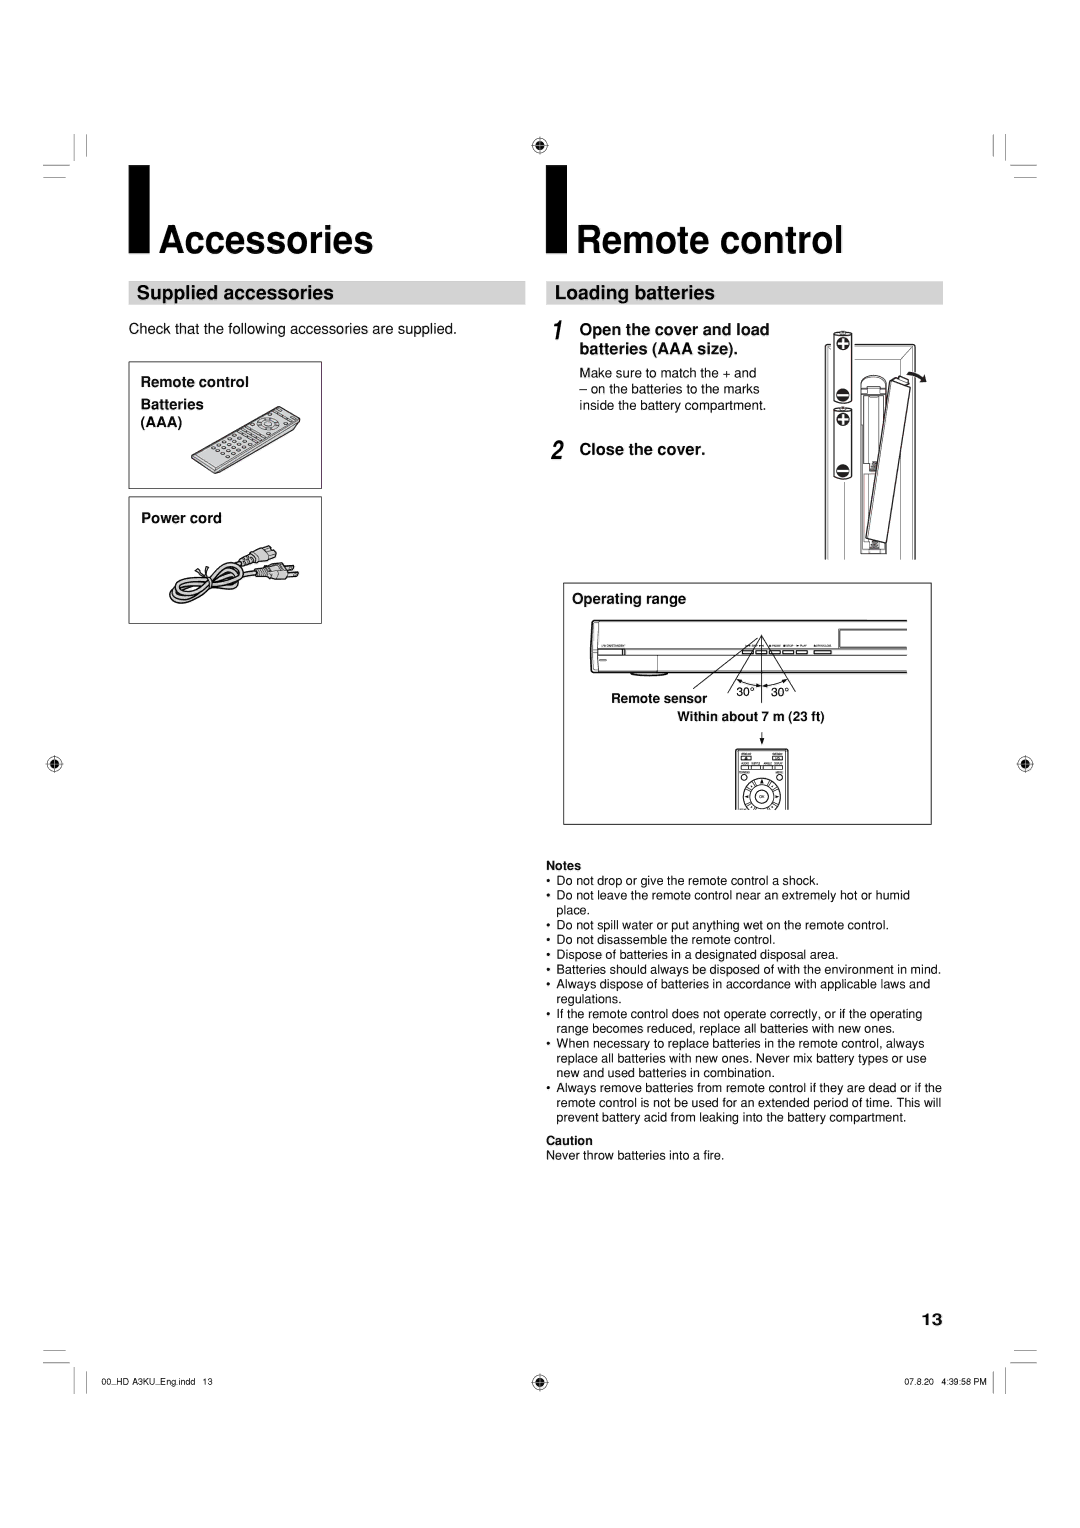 Toshiba HD-A3KC owner manual Accessories, Remote control, Supplied accessories, Loading batteries 